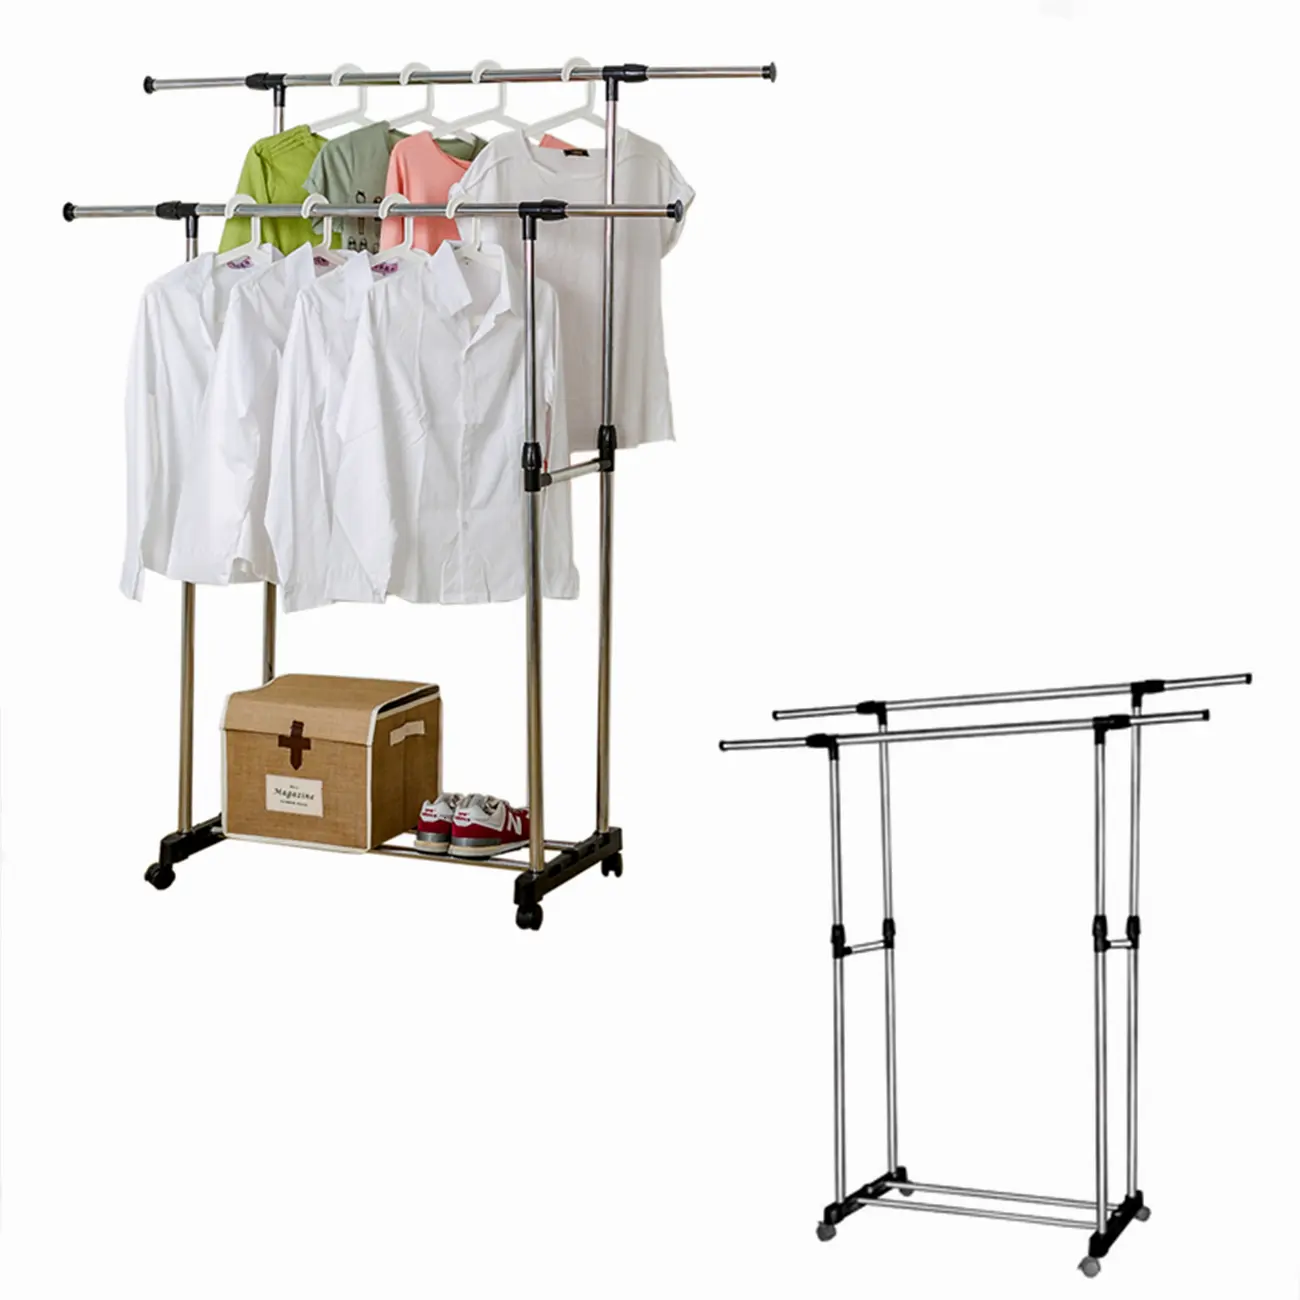 Standing Extendable Double Pole Hanging Cloth Drying Rack Clothes Garment Rack